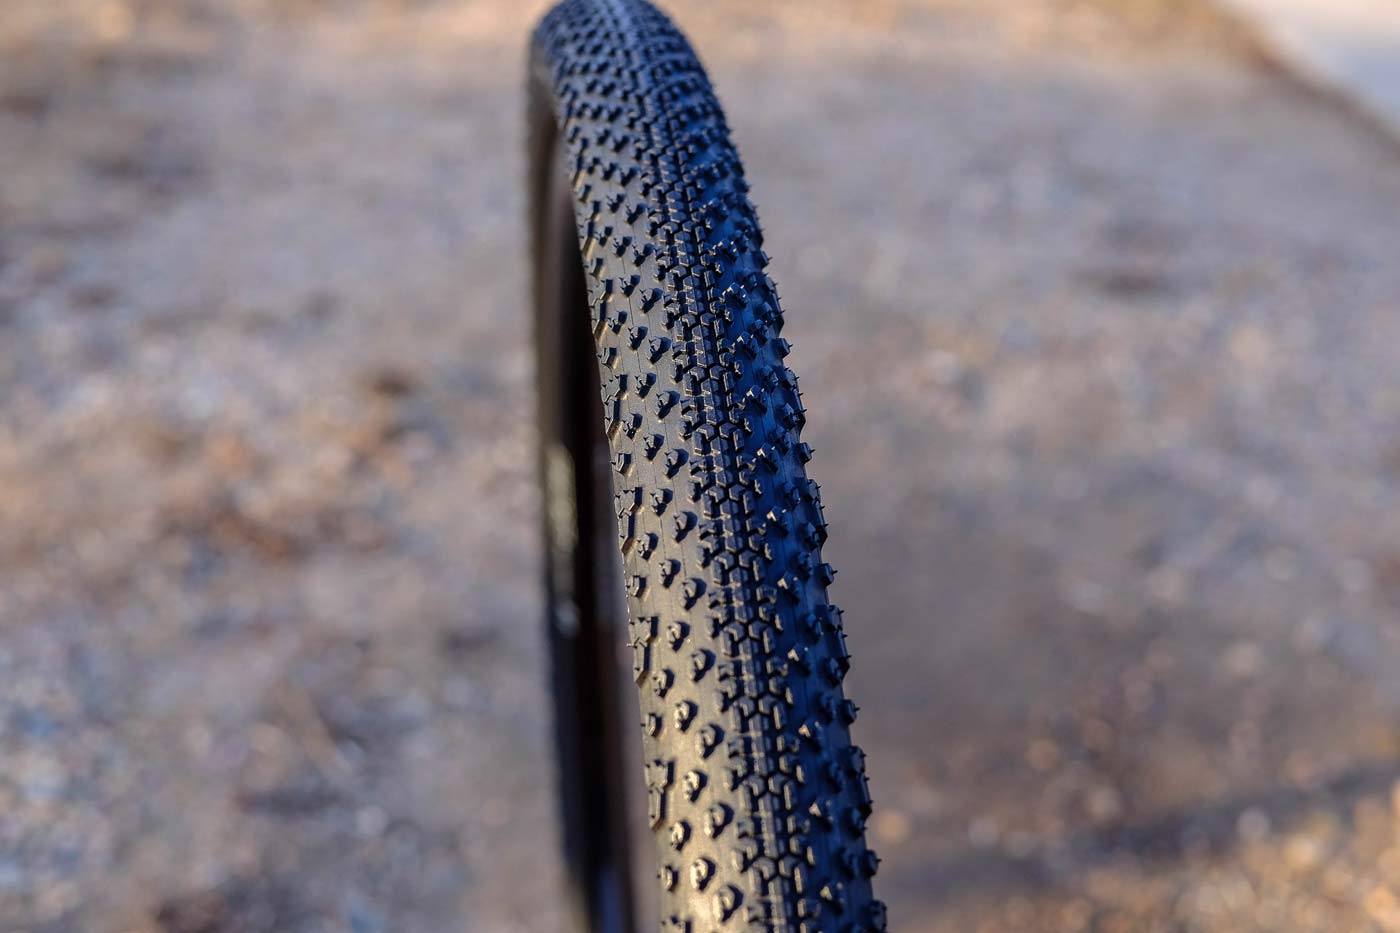 2018 Goodyear Connector Gravel Bike Tires are tubeless ready